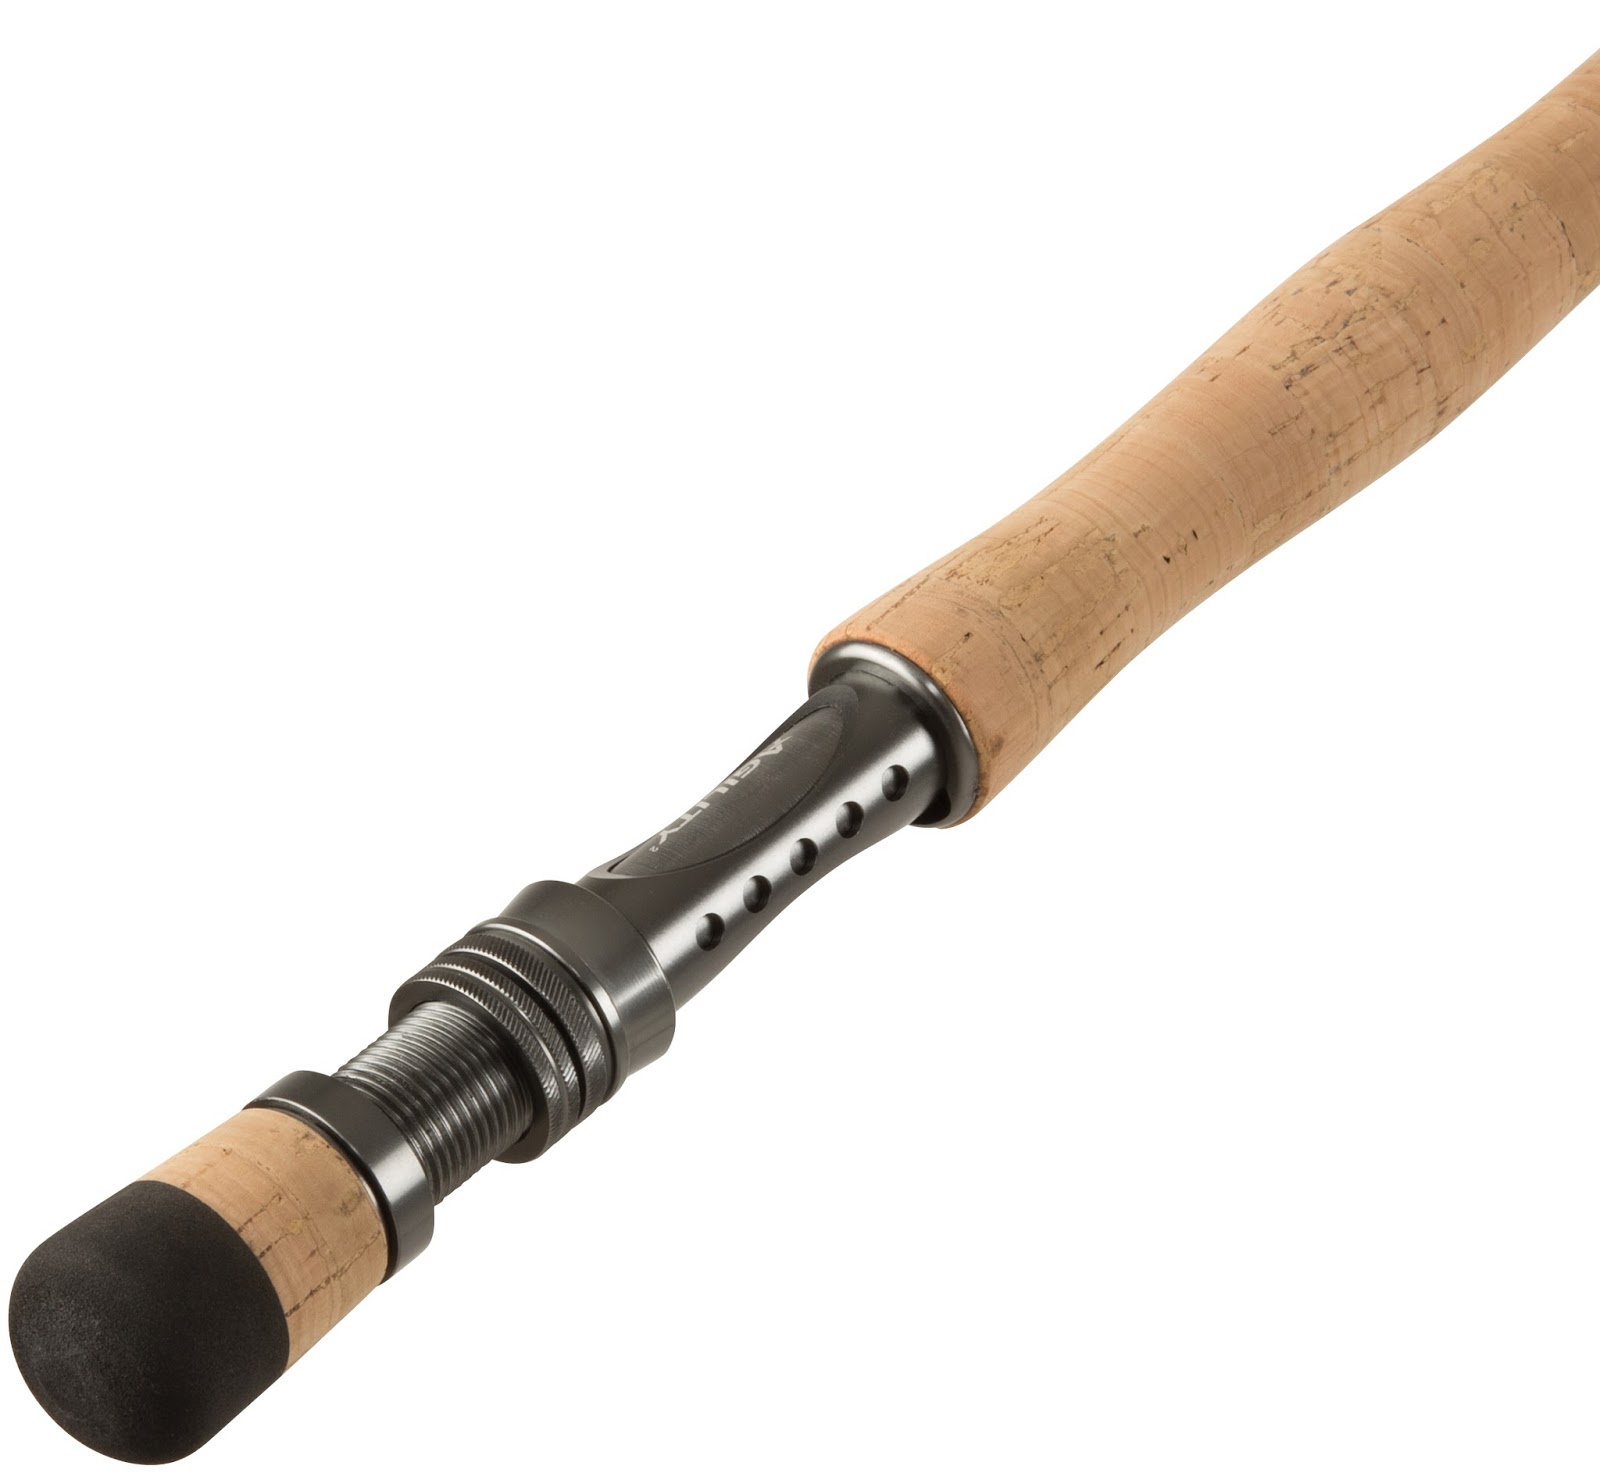 Shakespeare Agility 2 Exp Travel Fly Rod Review